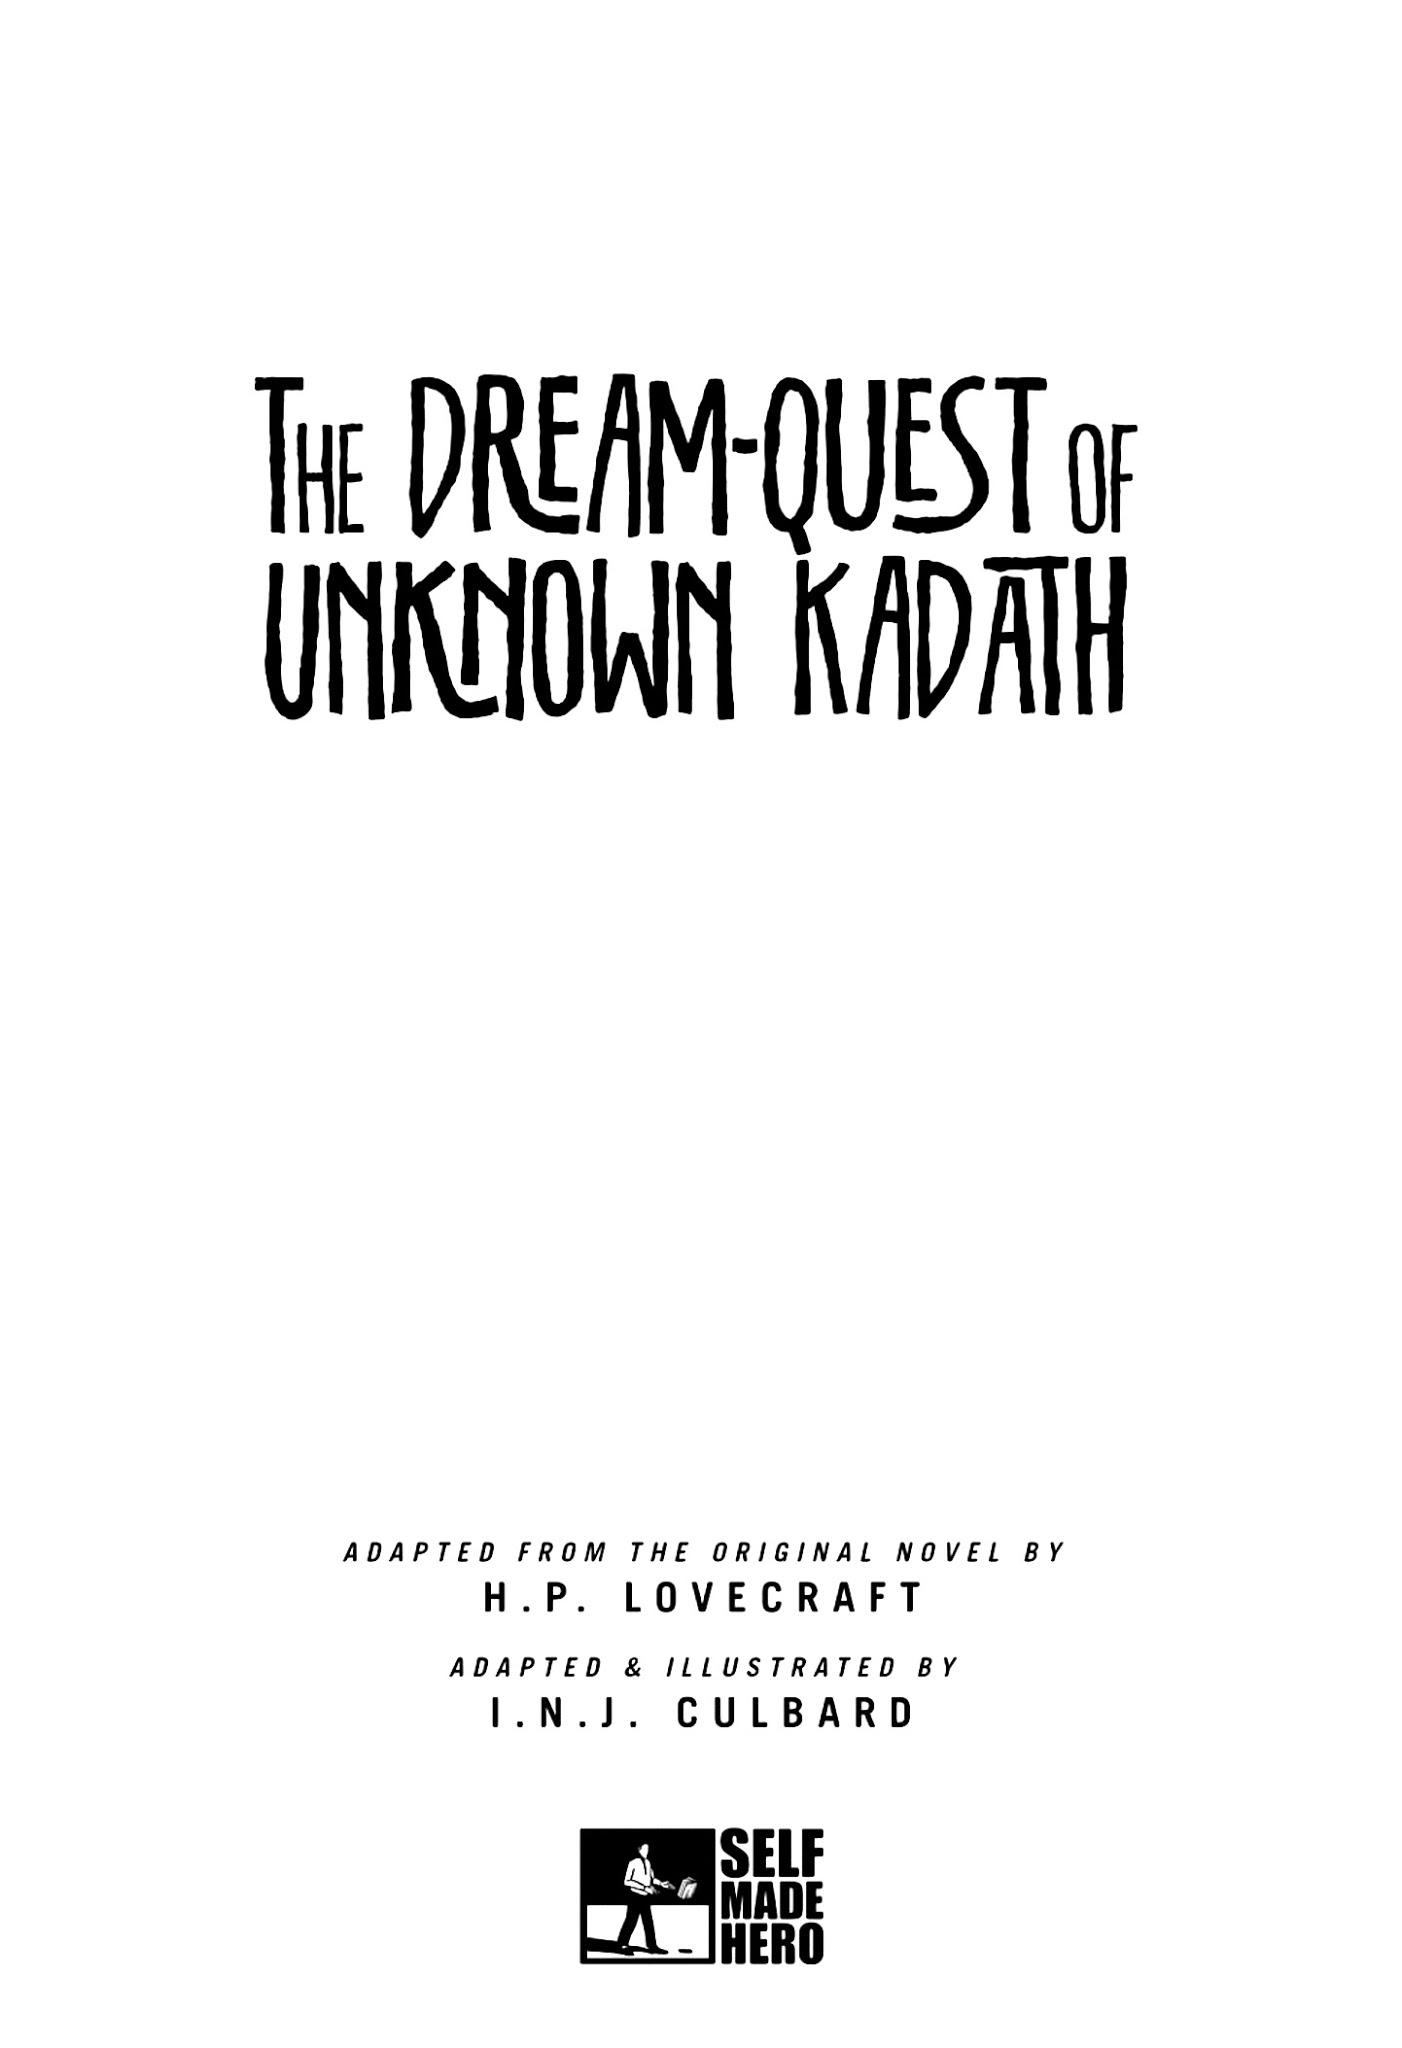 Read online The Dream-Quest of Unknown Kadath comic -  Issue # TPB - 5